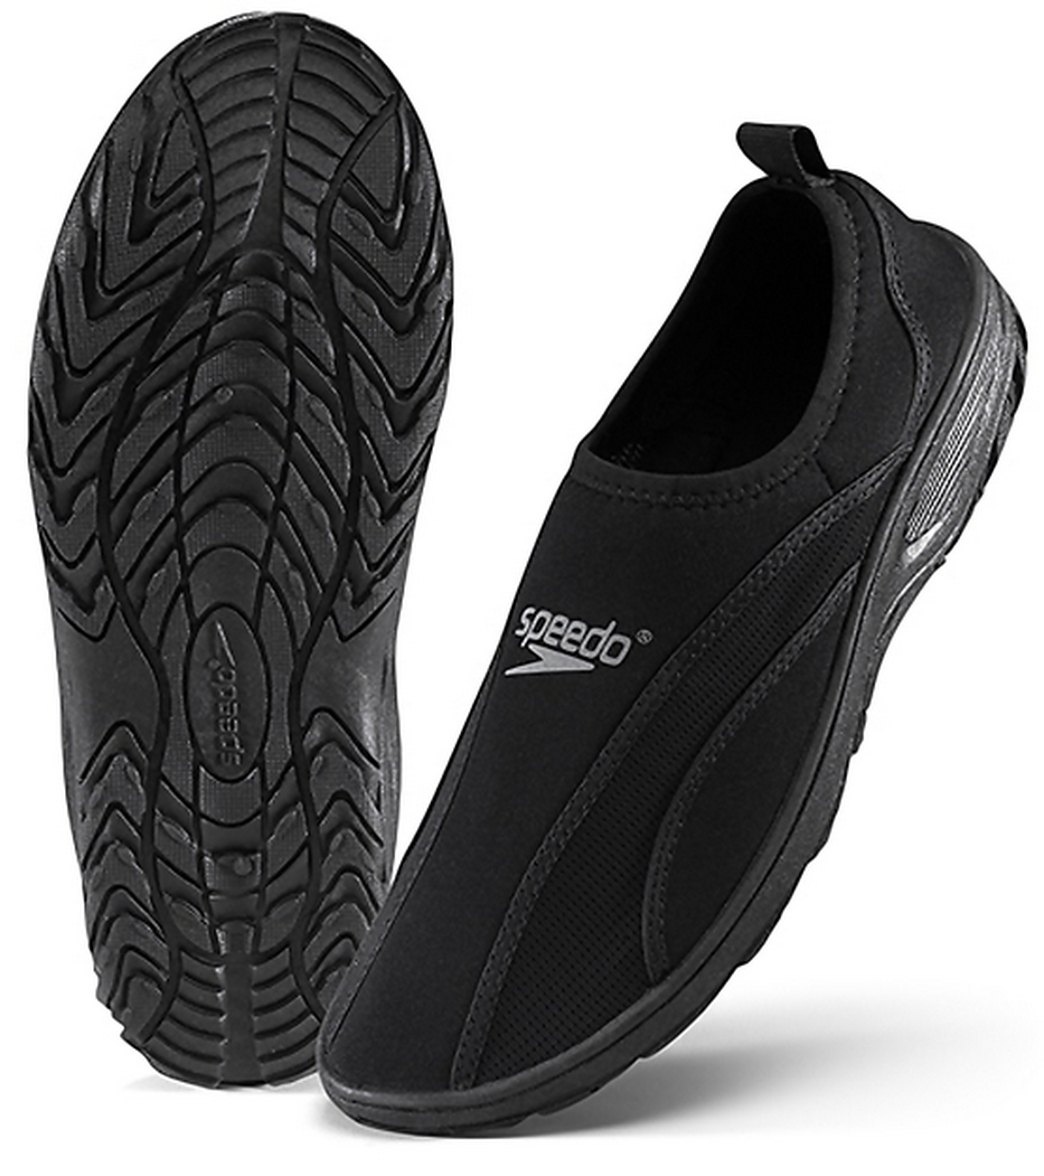 speedos water shoes